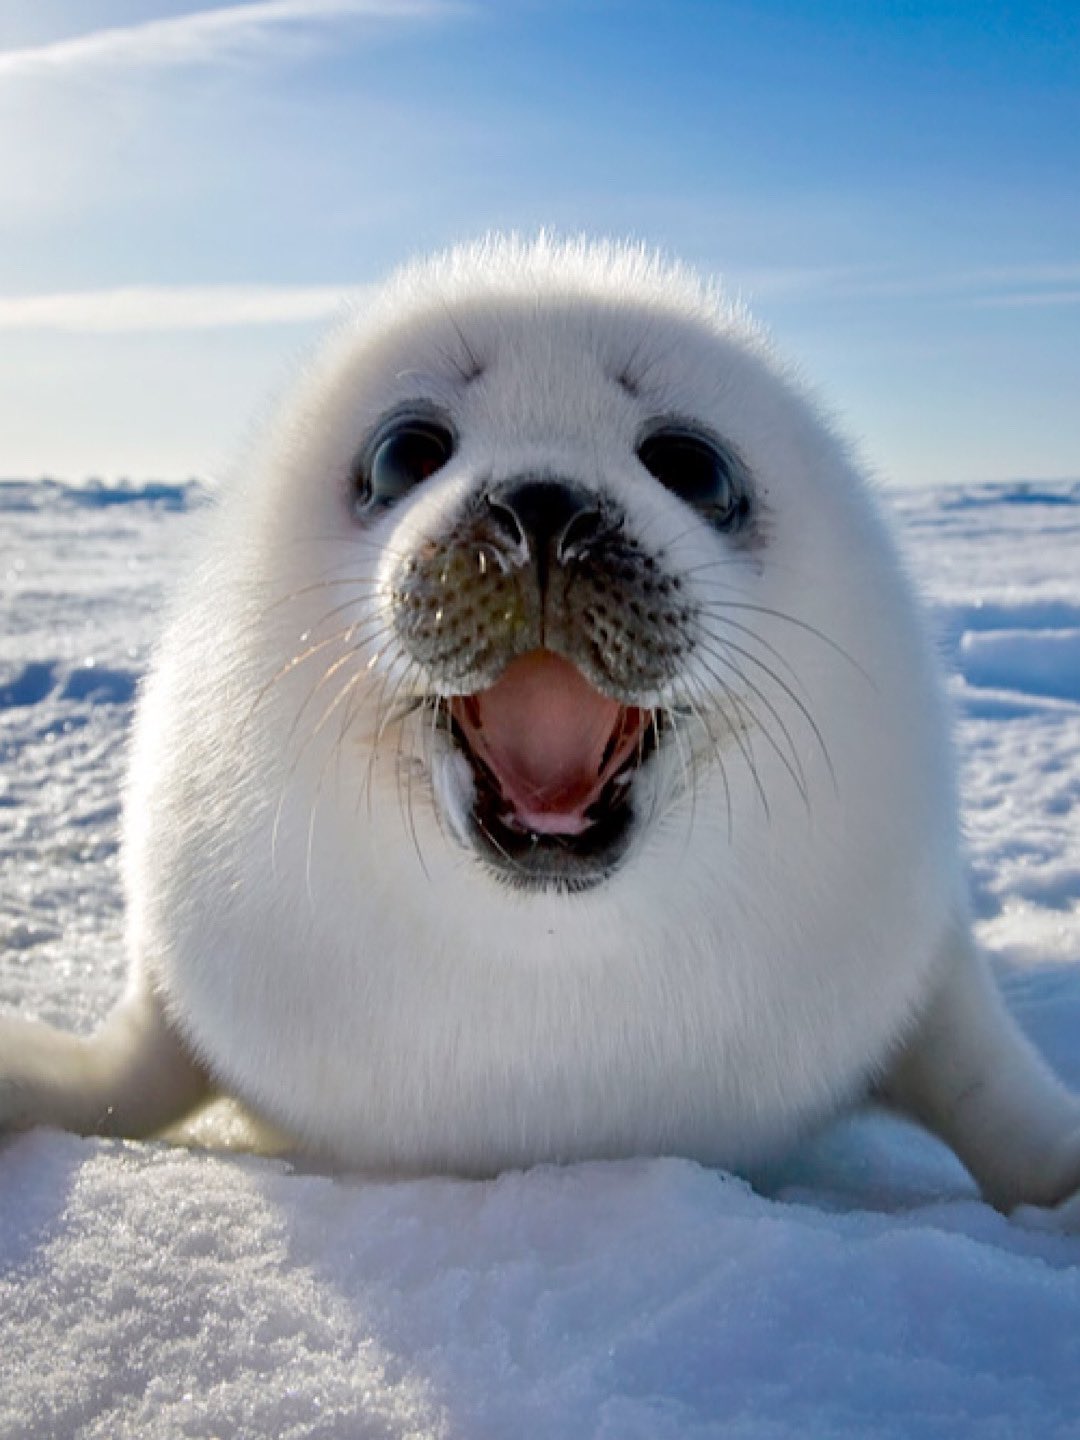 Meet the adorable seal animal cute and learn more about them